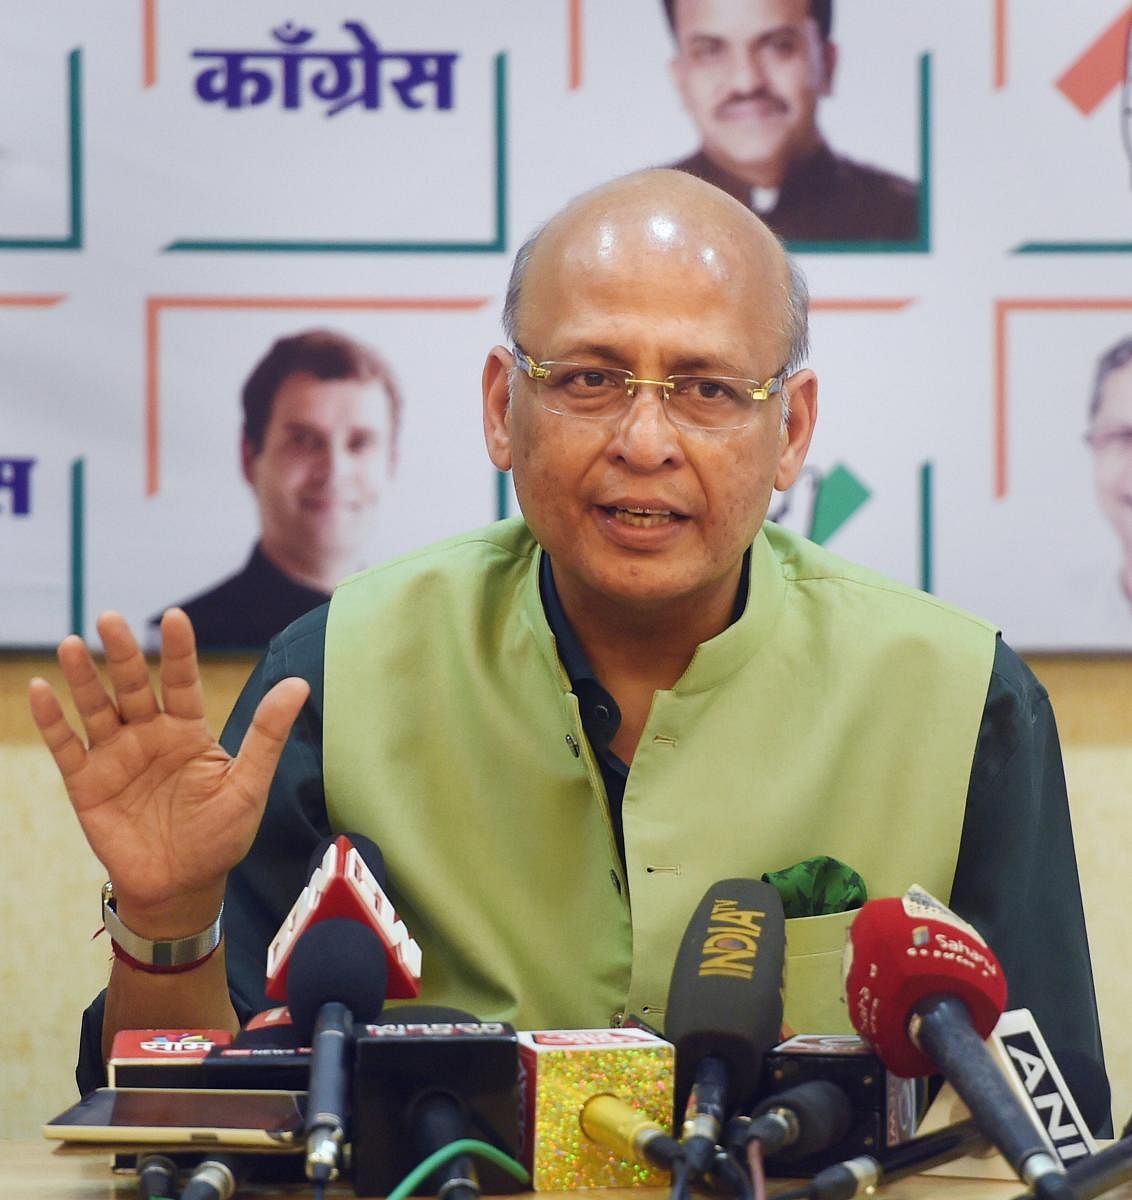 However, signalling a shift in stance on Tuesday, Congress spokesperson Abhishek Manu Singhvi tweeted: "Congress highly responsible and very restrained post-Pulwama. Modi pre-2014 made highly provocative statements including resignation calls for then PM